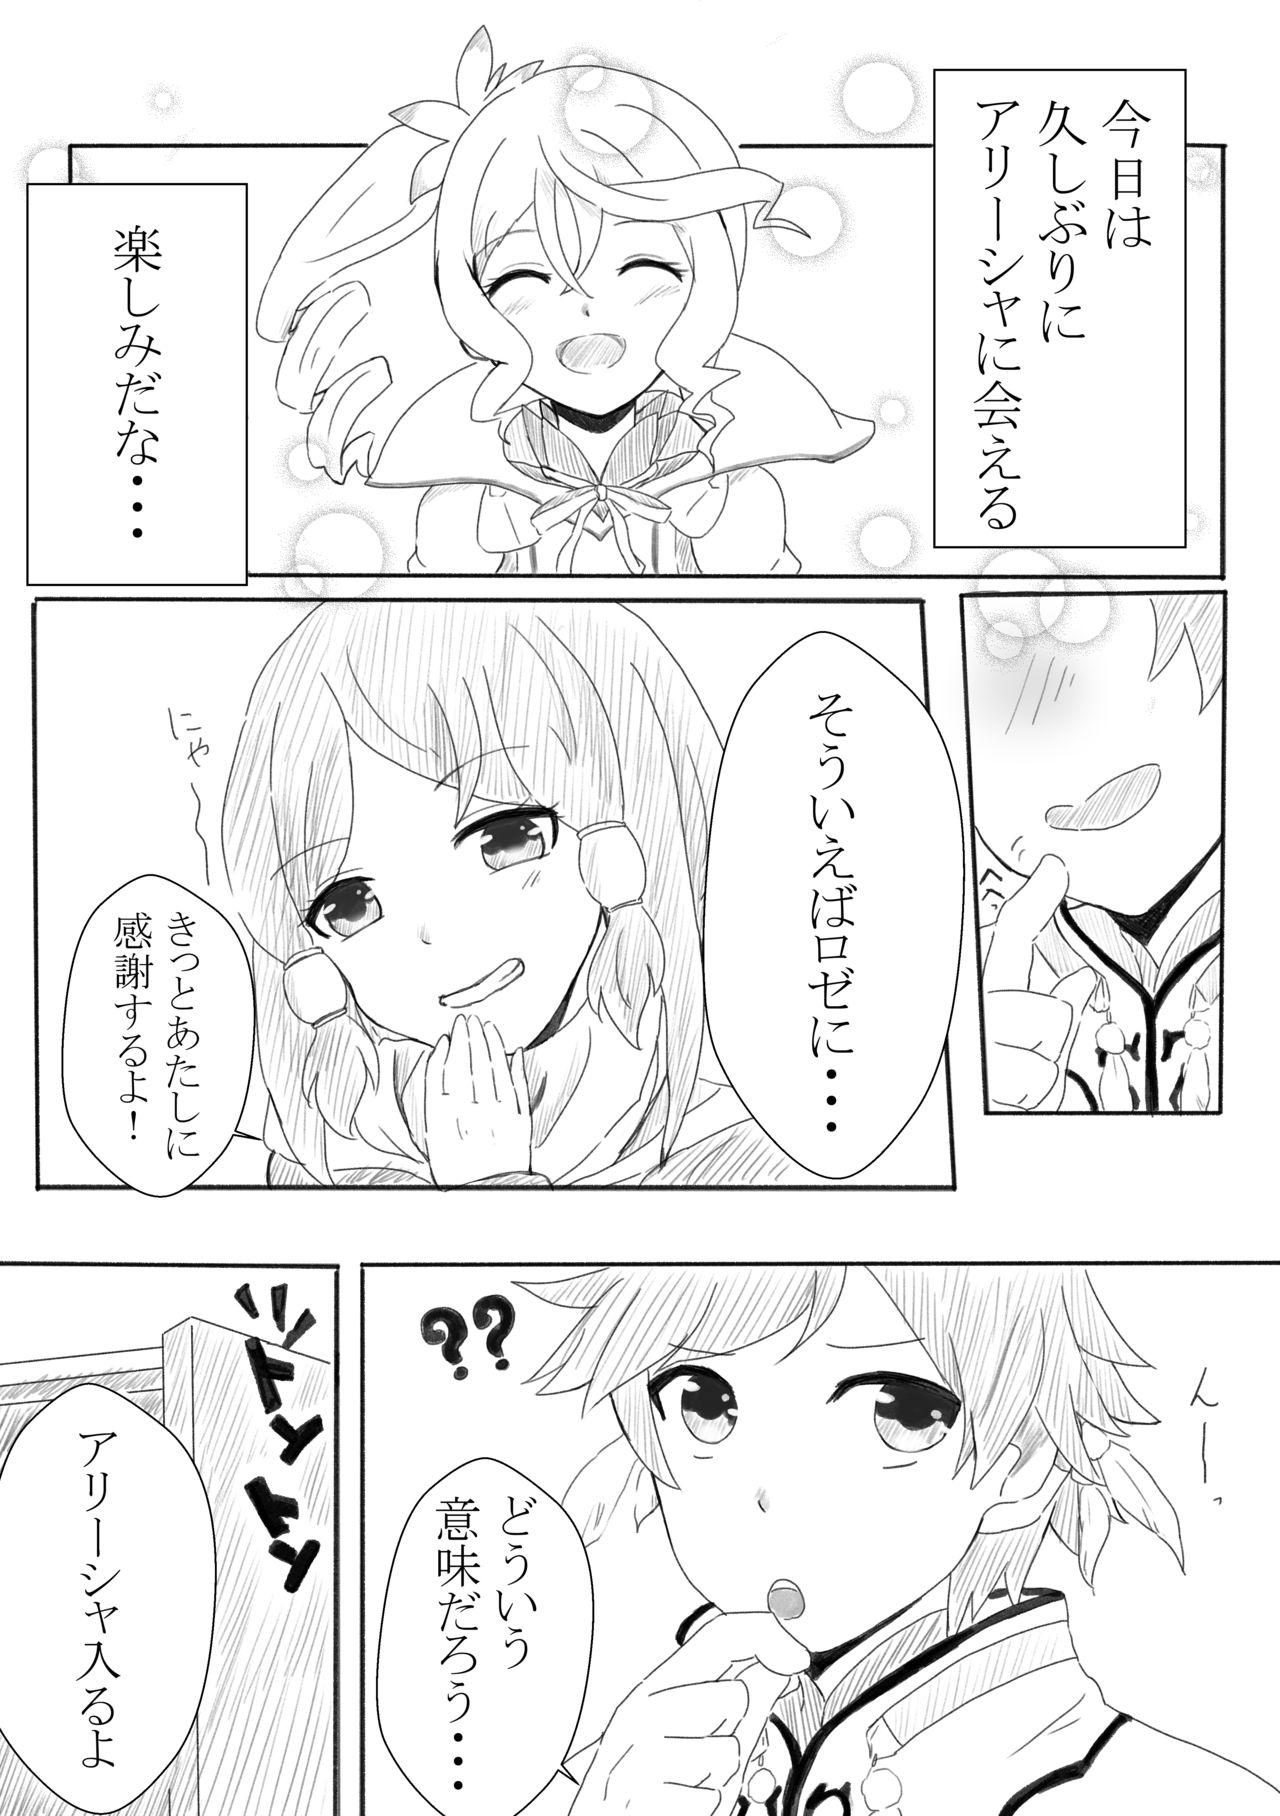 Fuck Her Hard アリーシャで癒して？ - Tales of zestiria Wanking - Page 2